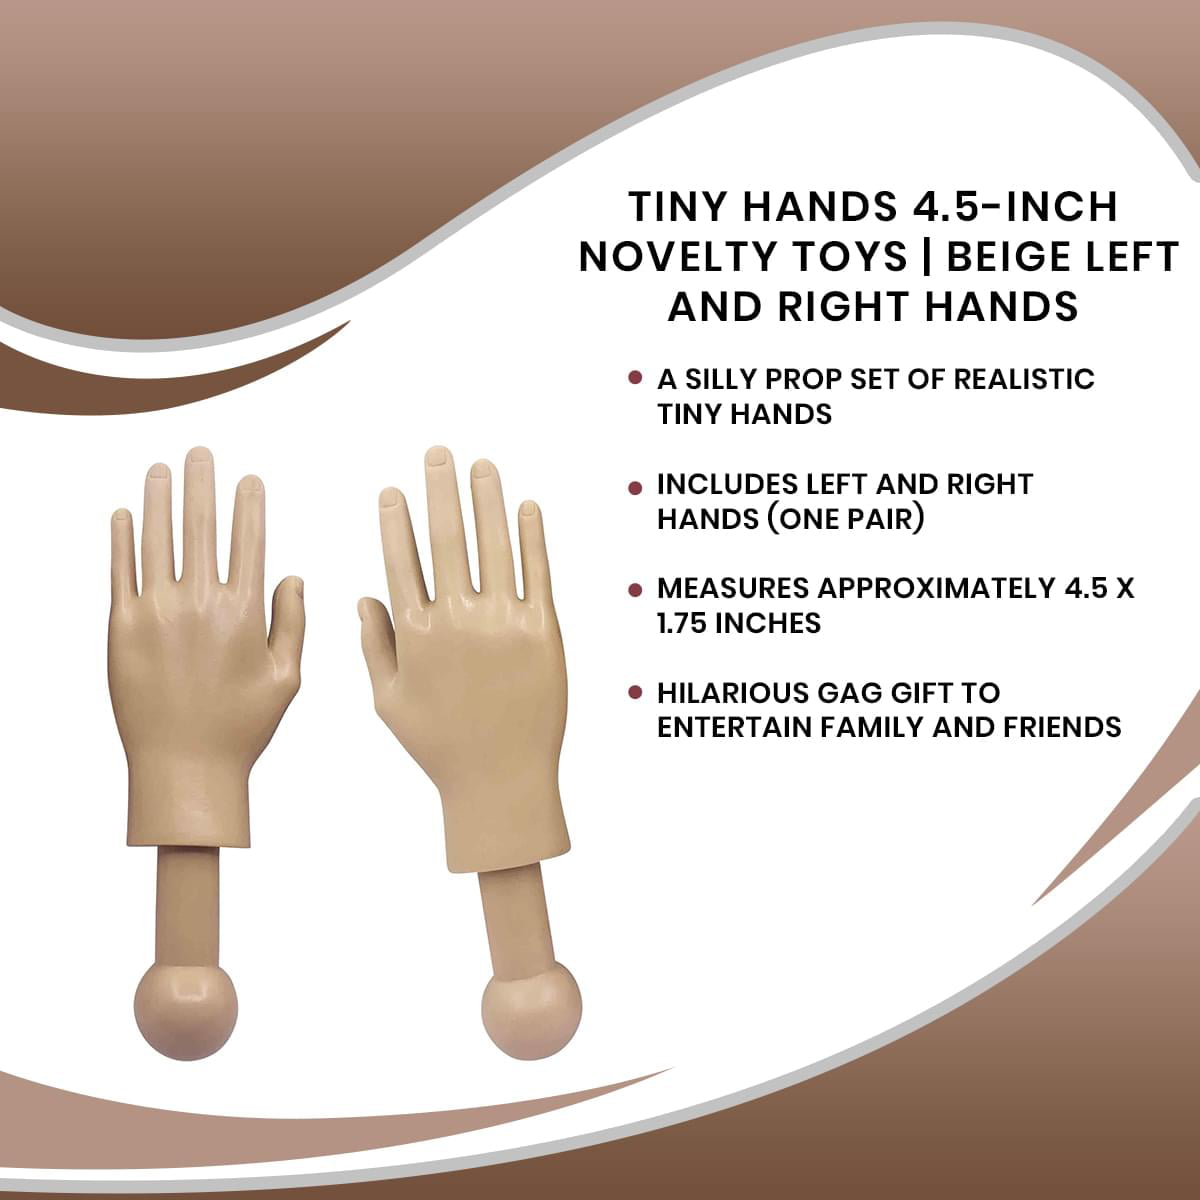 Tiny Hands 4.5-Inch Novelty Toy | Left and Right + Middle Finger Hand Deep  Brown